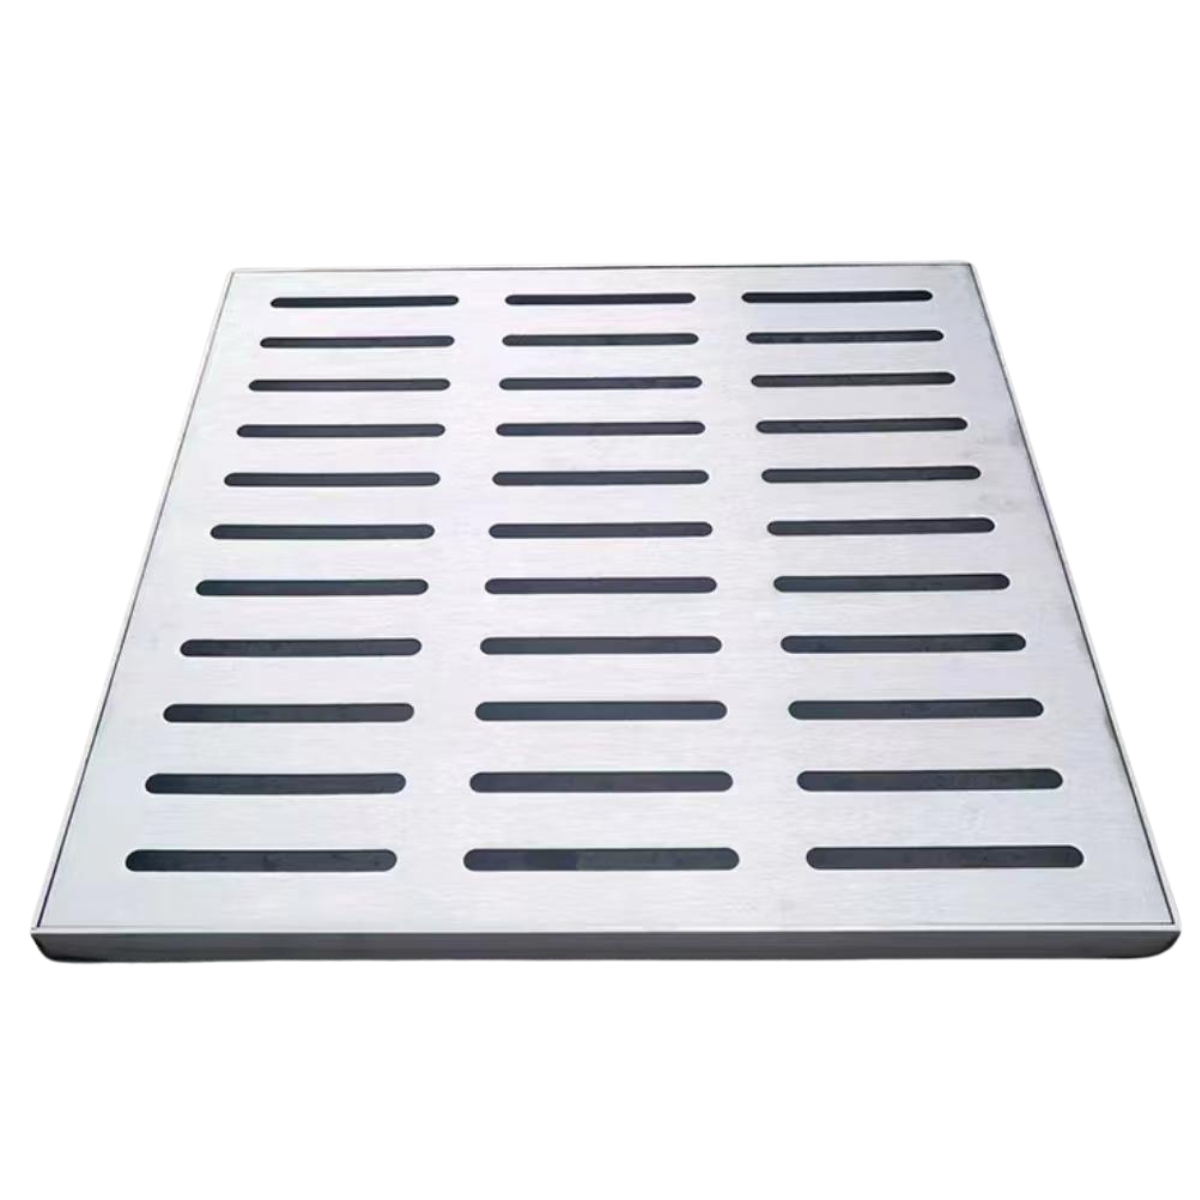 Stainless steel rain grate Stainless steel manhole cover Gutter cover Kitchen drain Manhole cover